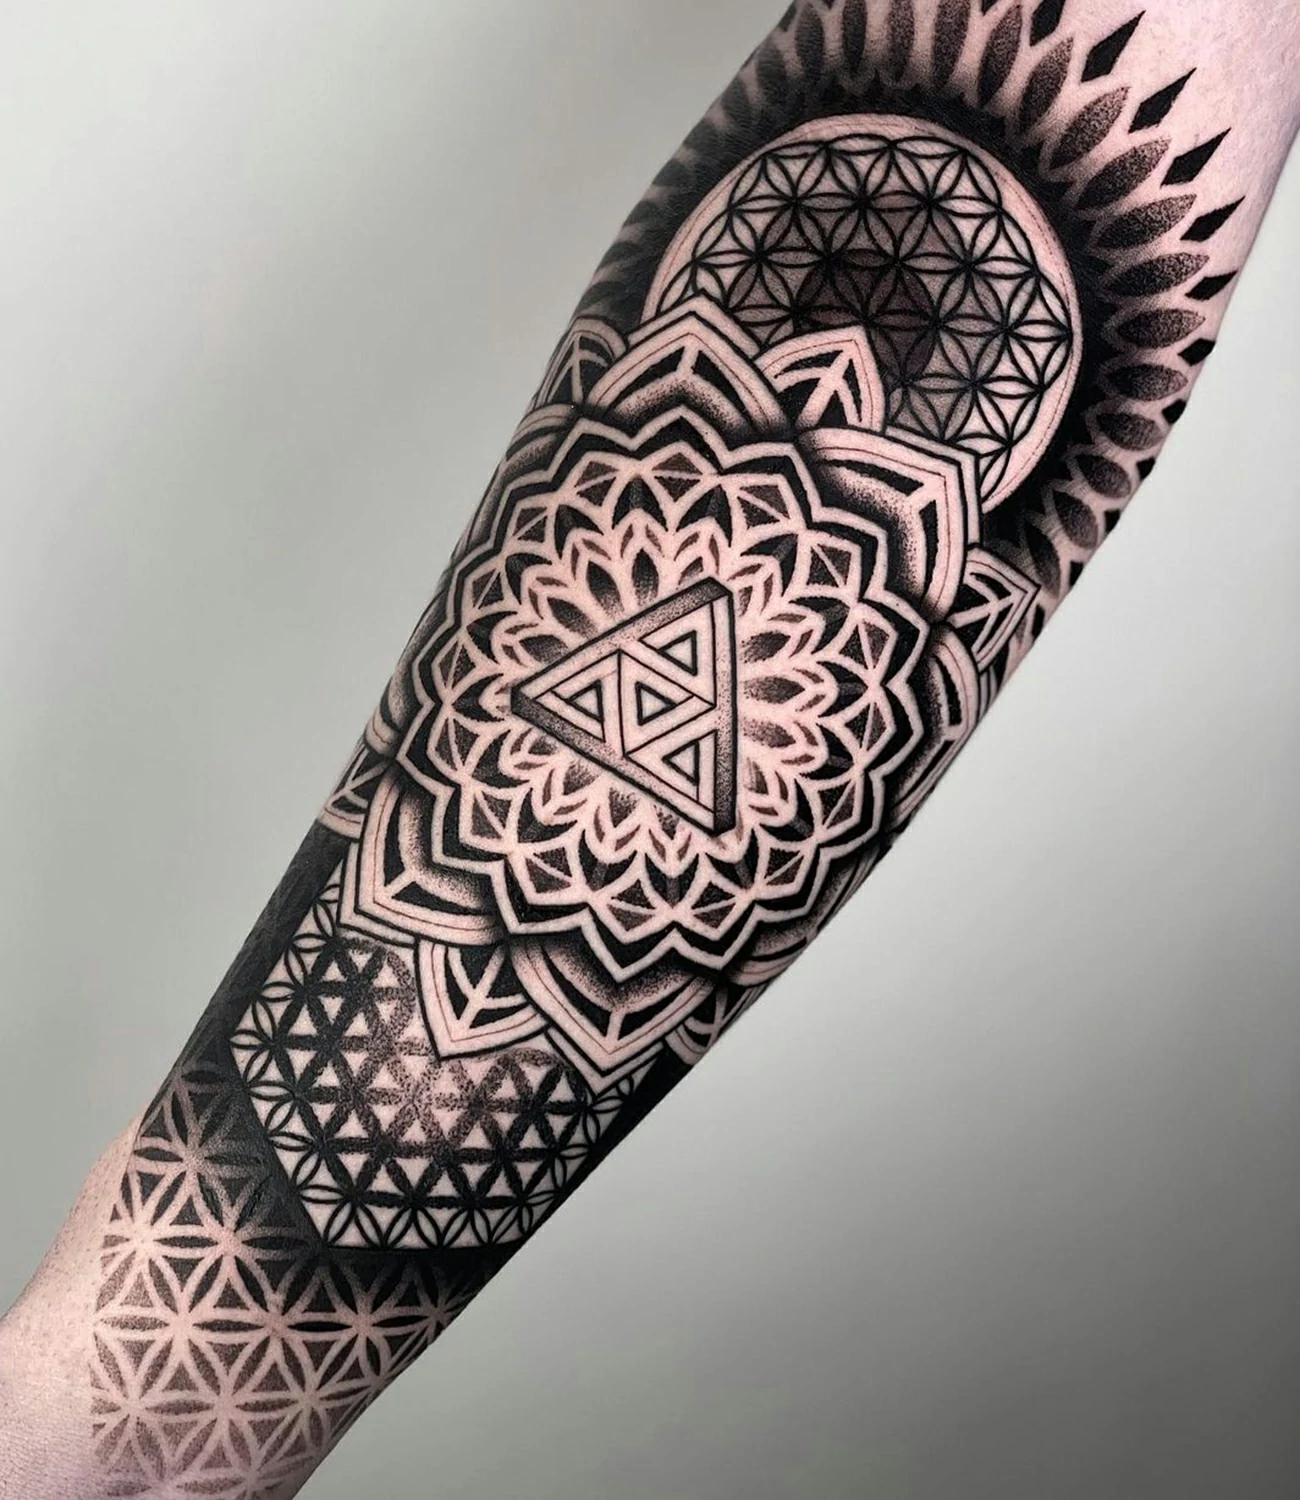 Geometric Tattoos for Men: Geometric tattoos for men emphasize bold and structured designs that reflect strength and symmetry.